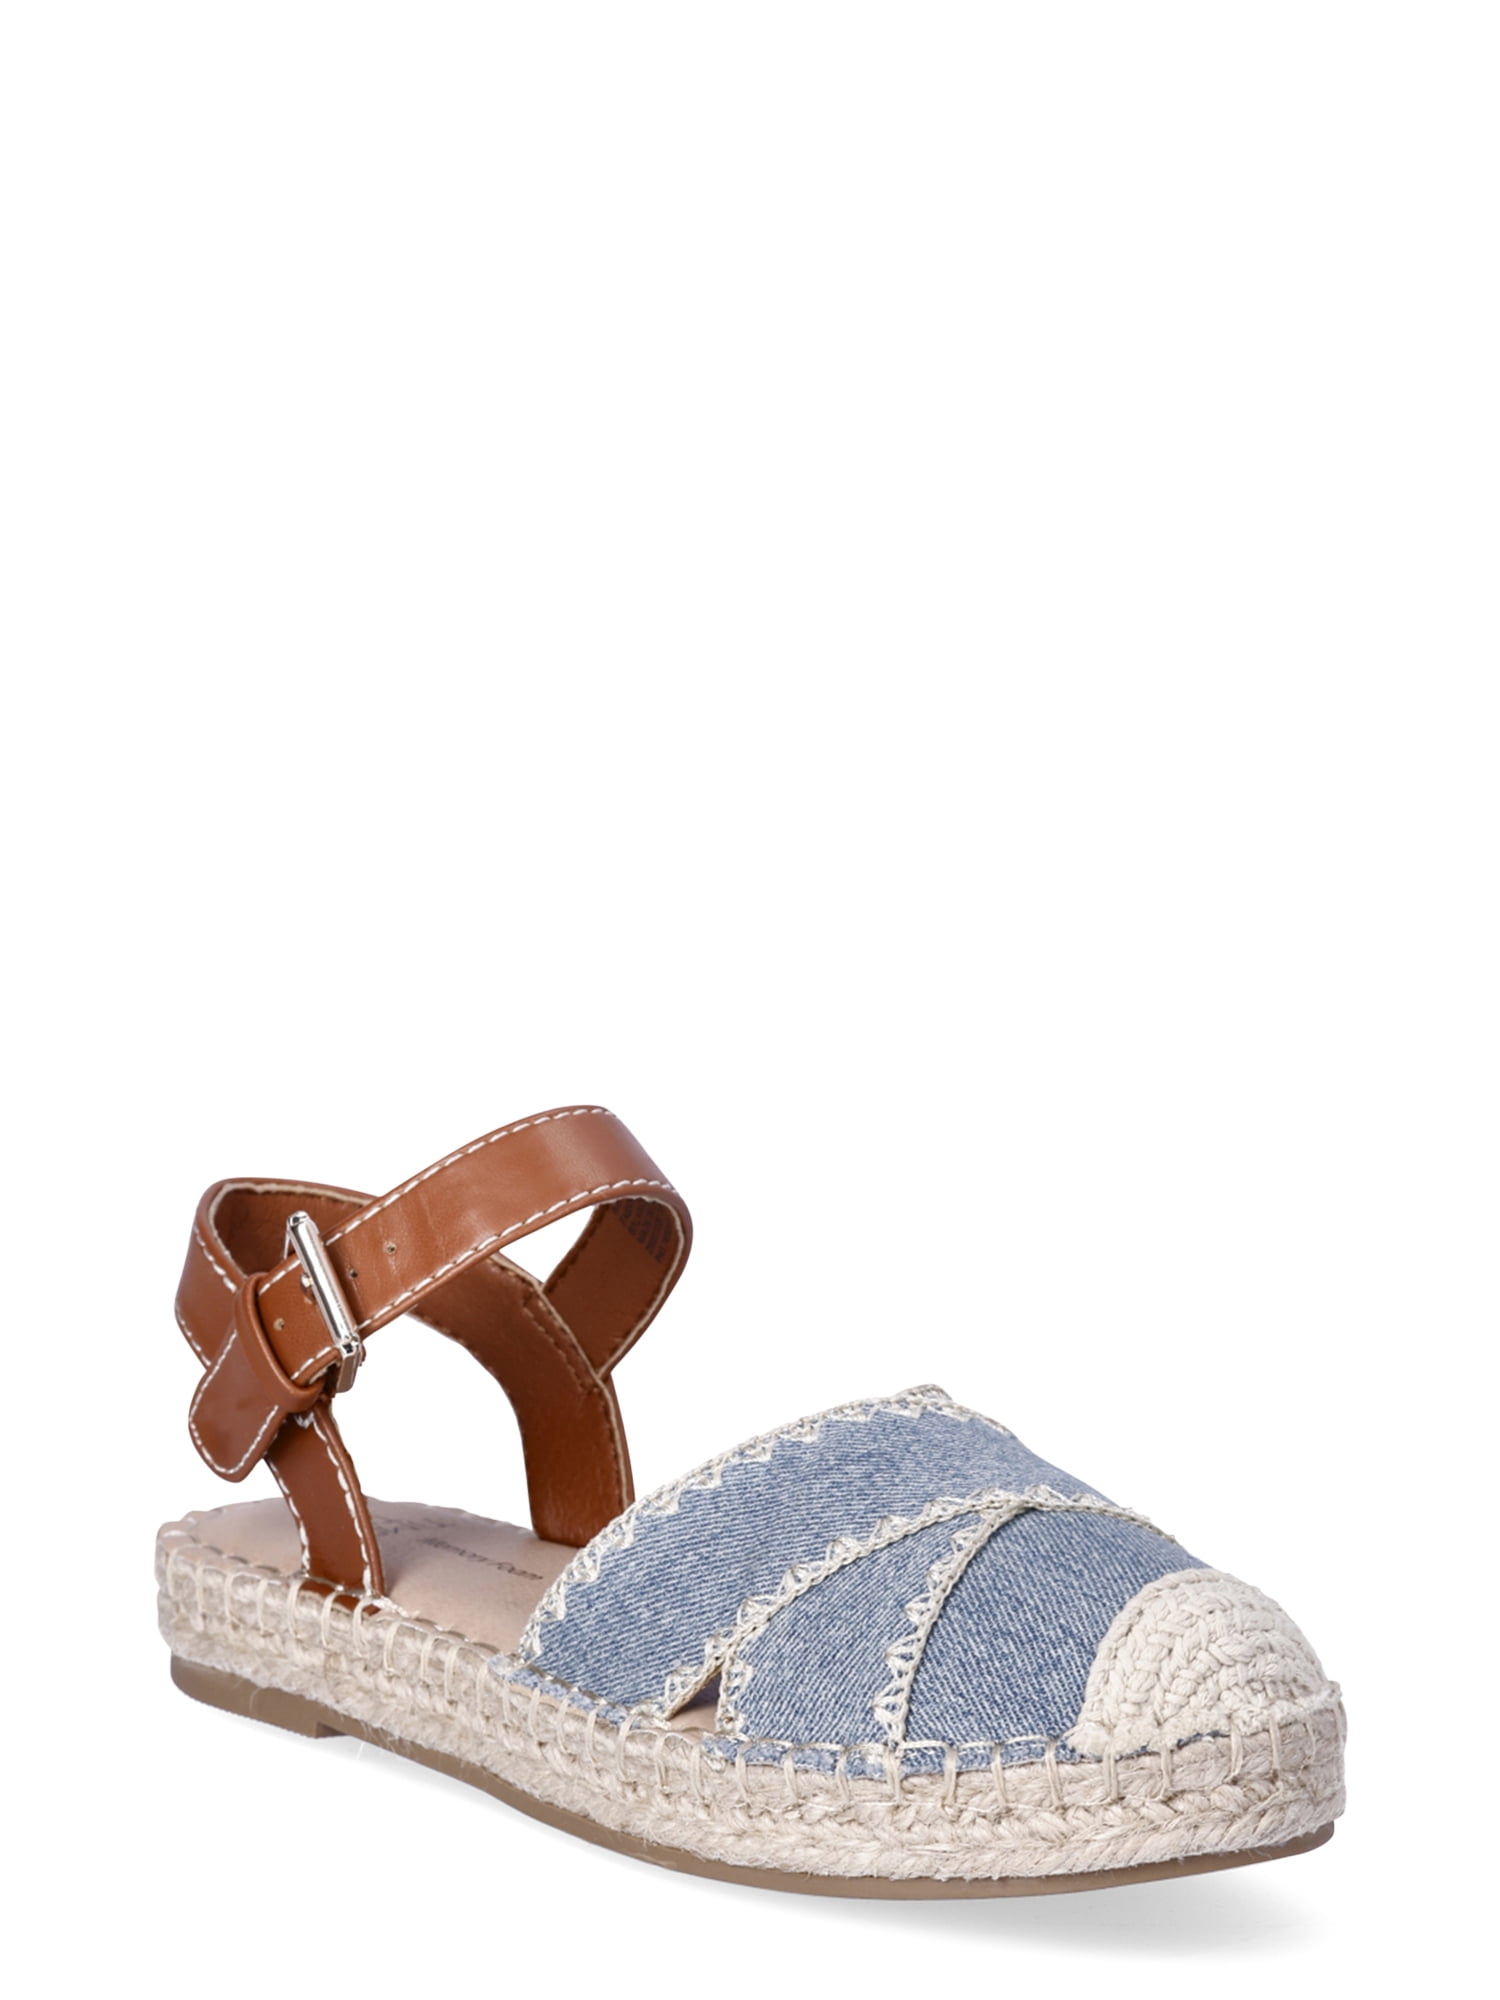 Time and Tru Women’s Espadrille Flats with Ankle Strap - Walmart.com